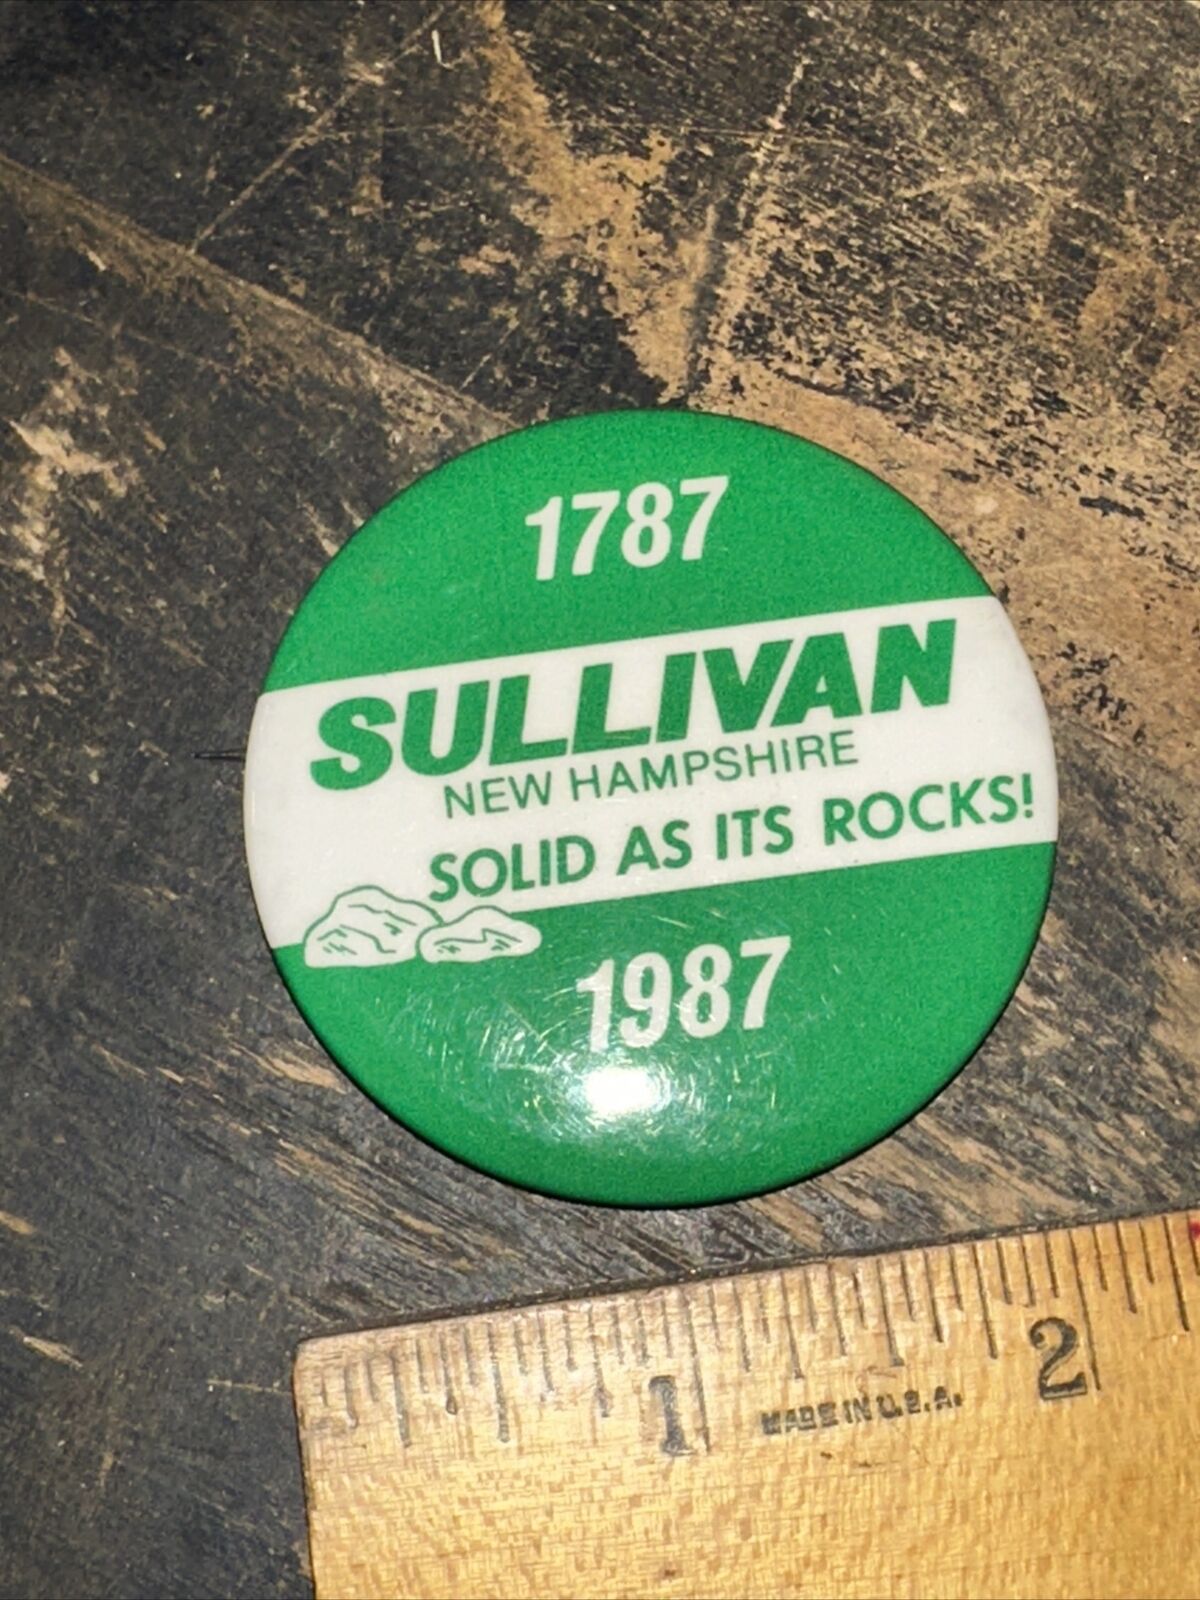 Vintage Pin Back Button Sullivan New Hampshire 1787-1987 “Solid as it’s Rocks”